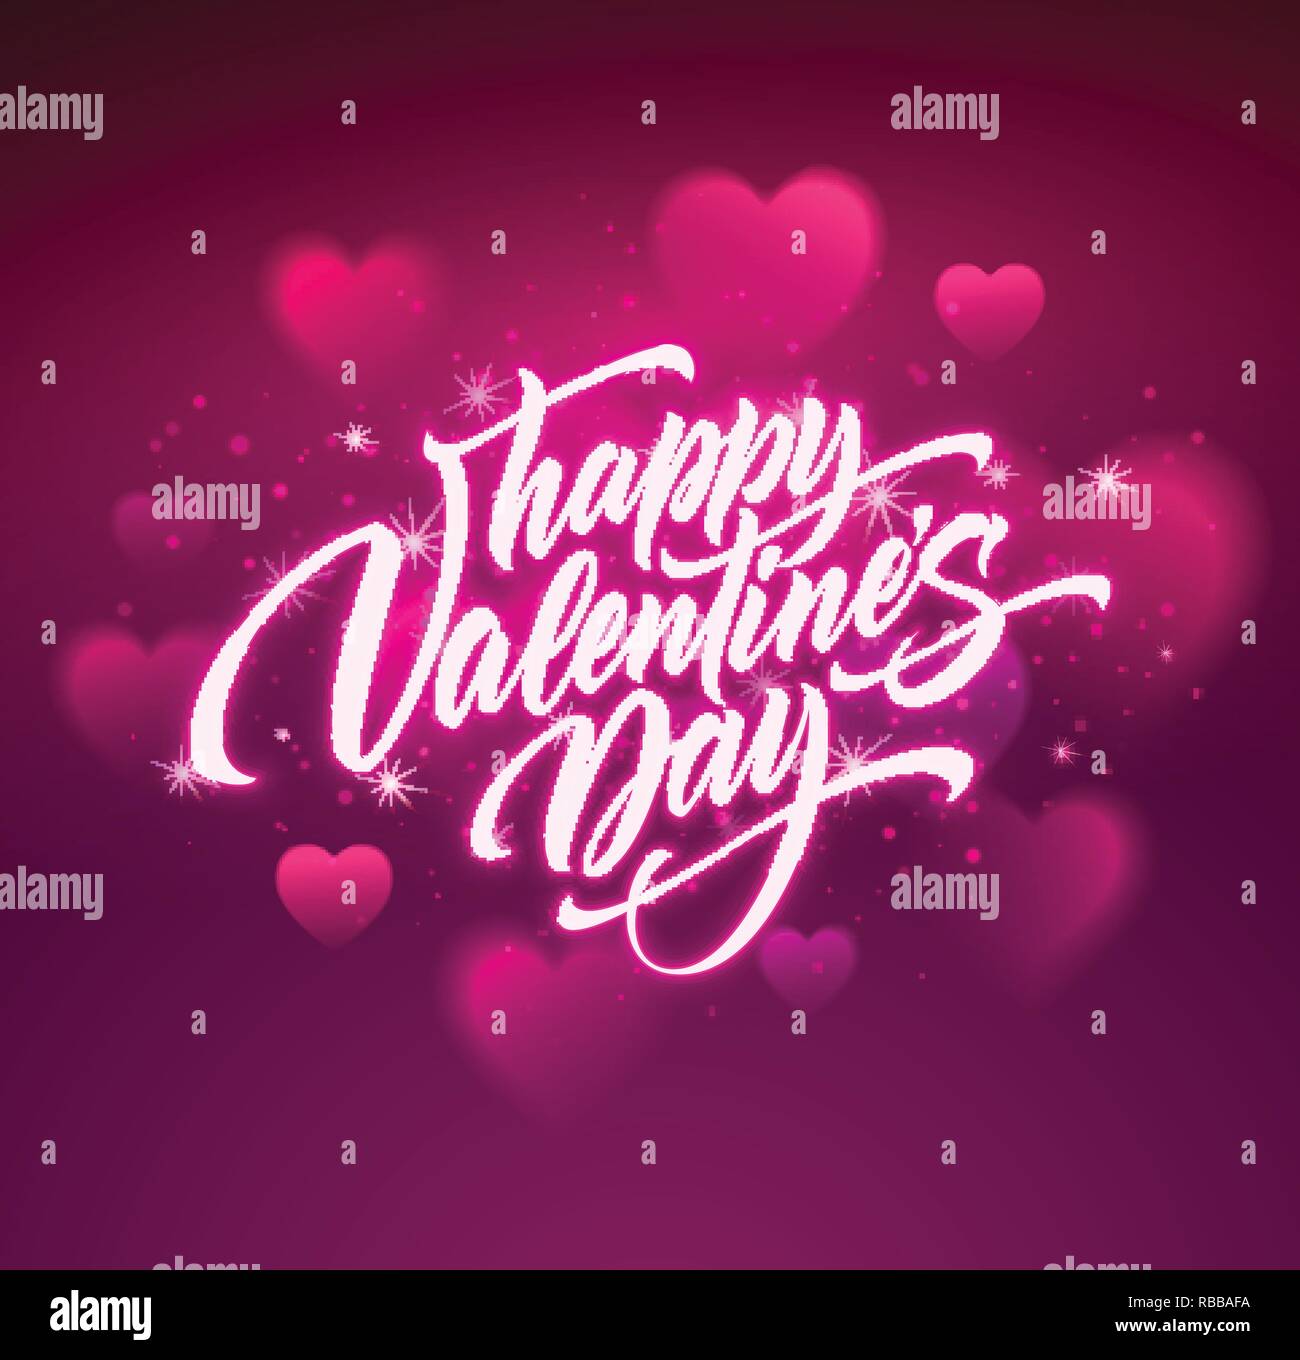 Happy valentines day handwritten text on blurred heart background. Vector illustration Stock Vector